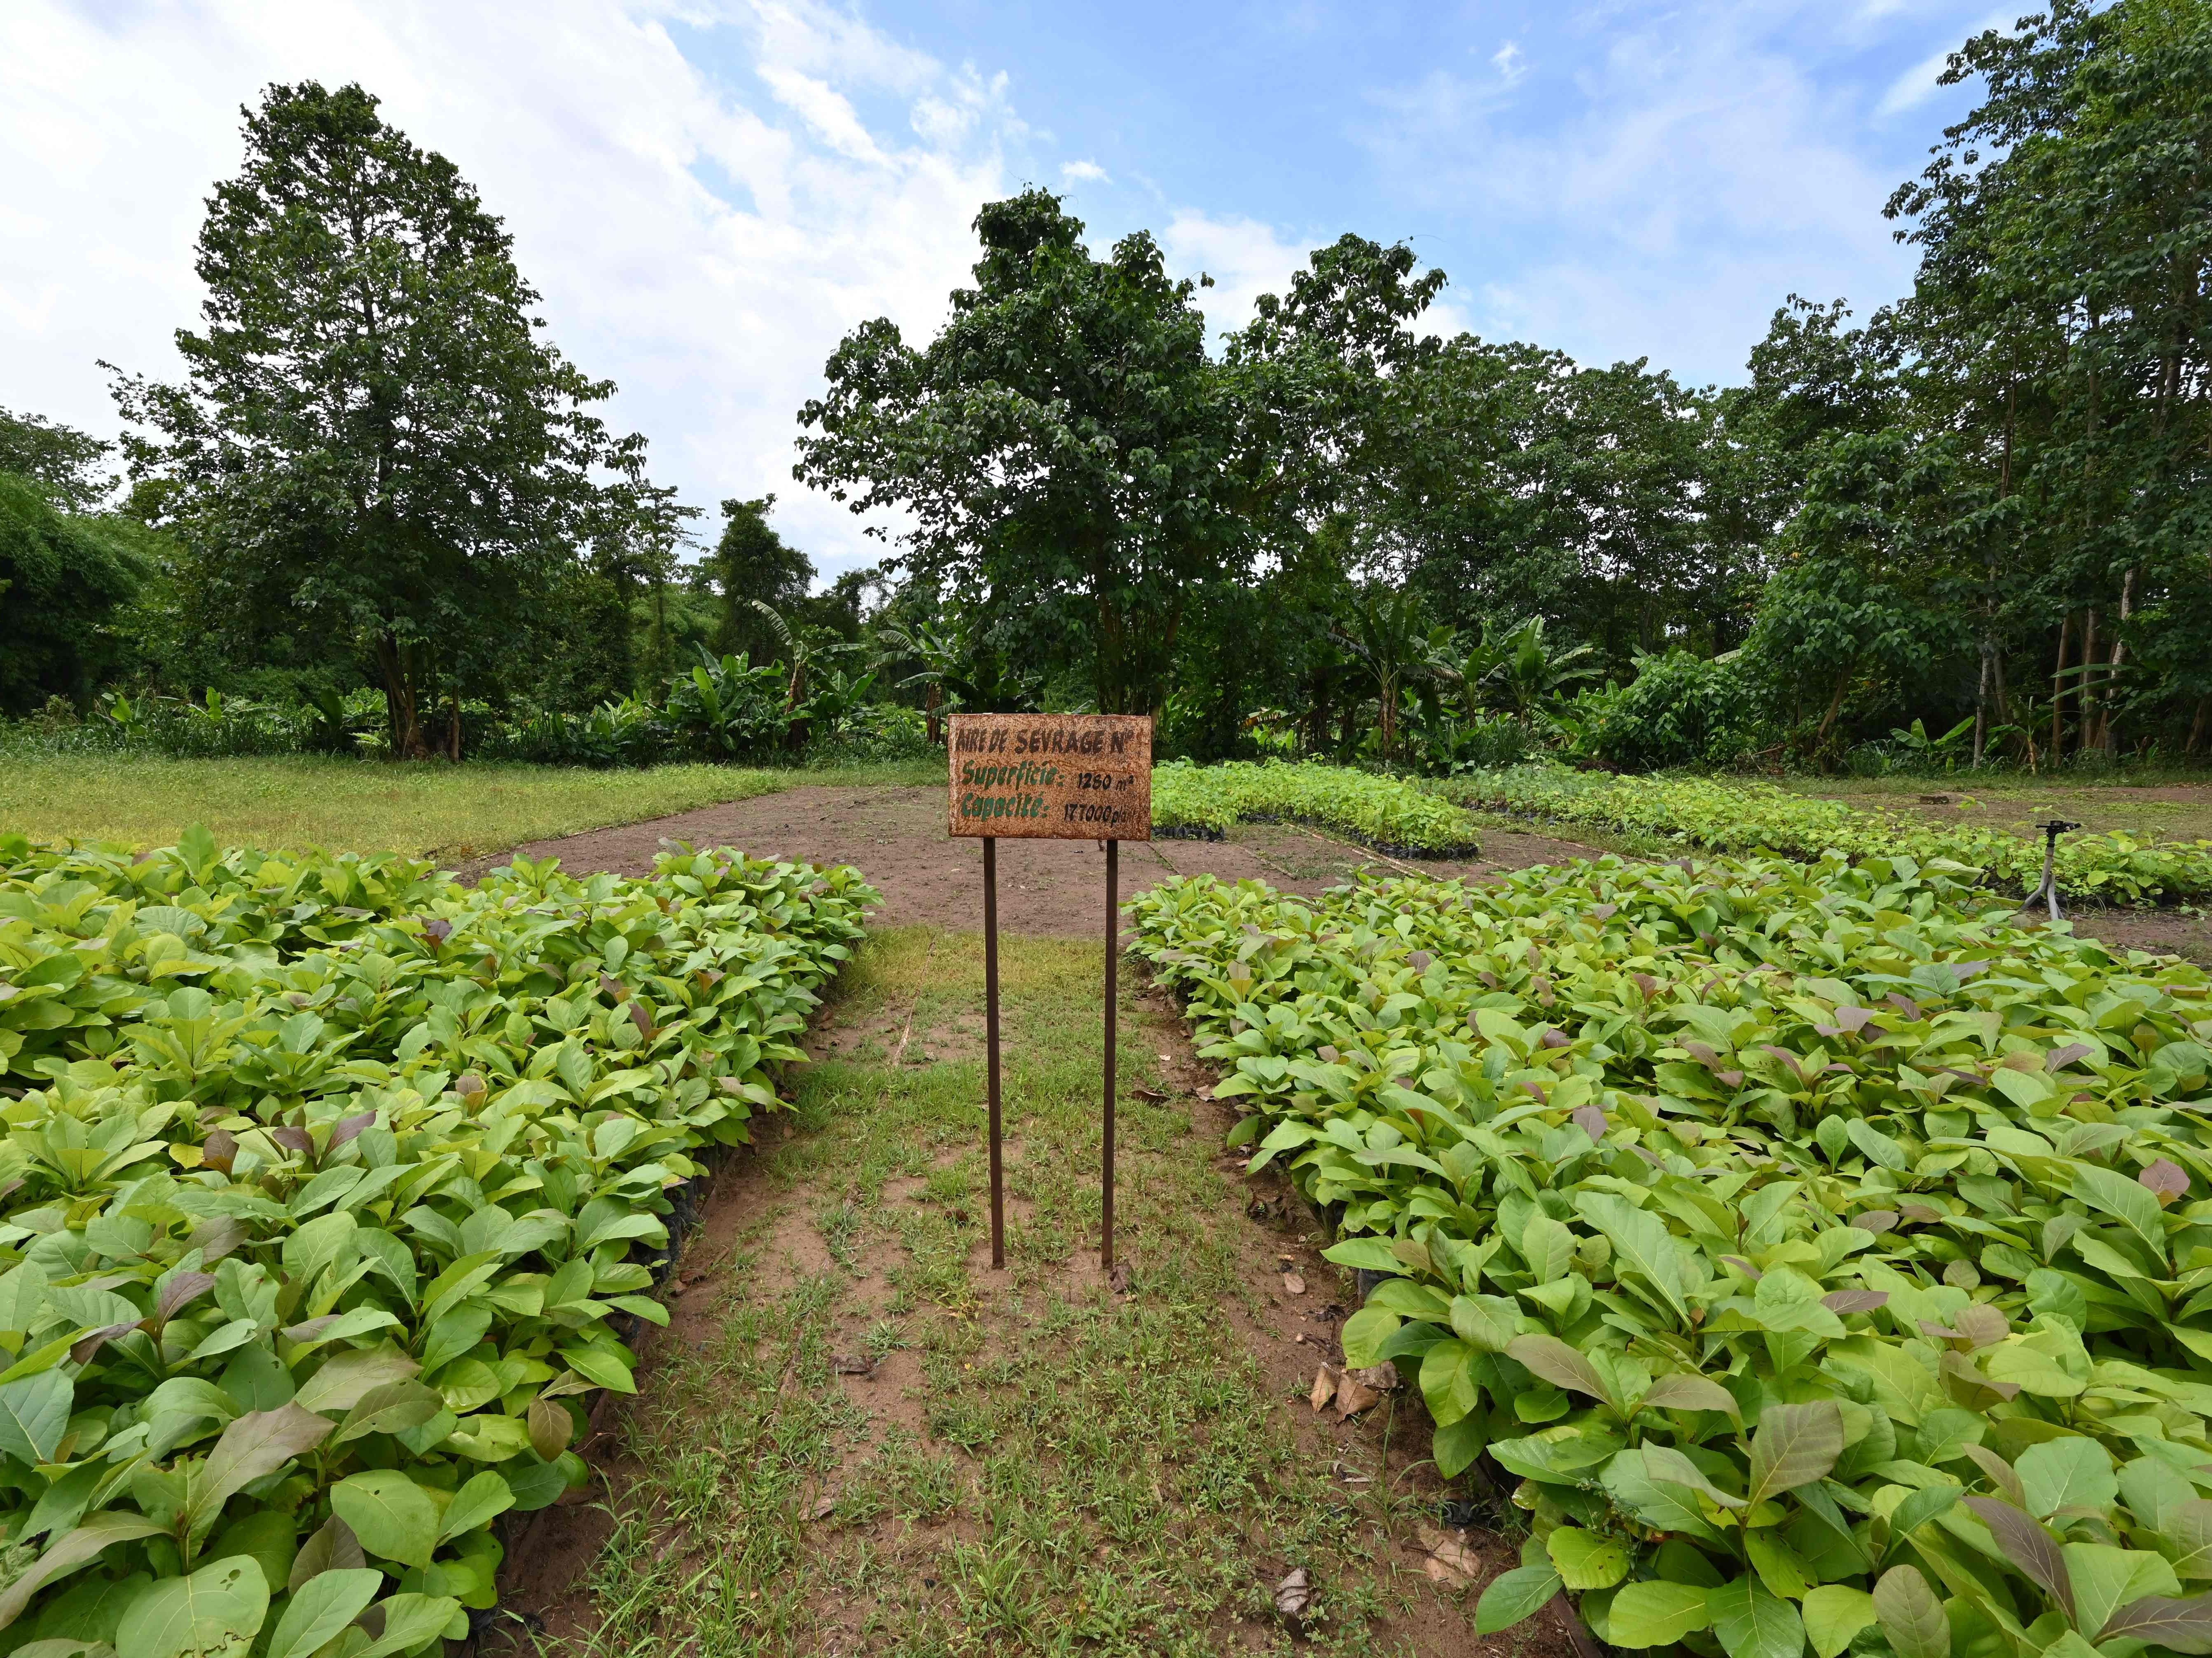 A general view of cuttings for reforestation in the classified forest of Tene near Oumé, south western region in Ivory Coast, on May 19, 2021.